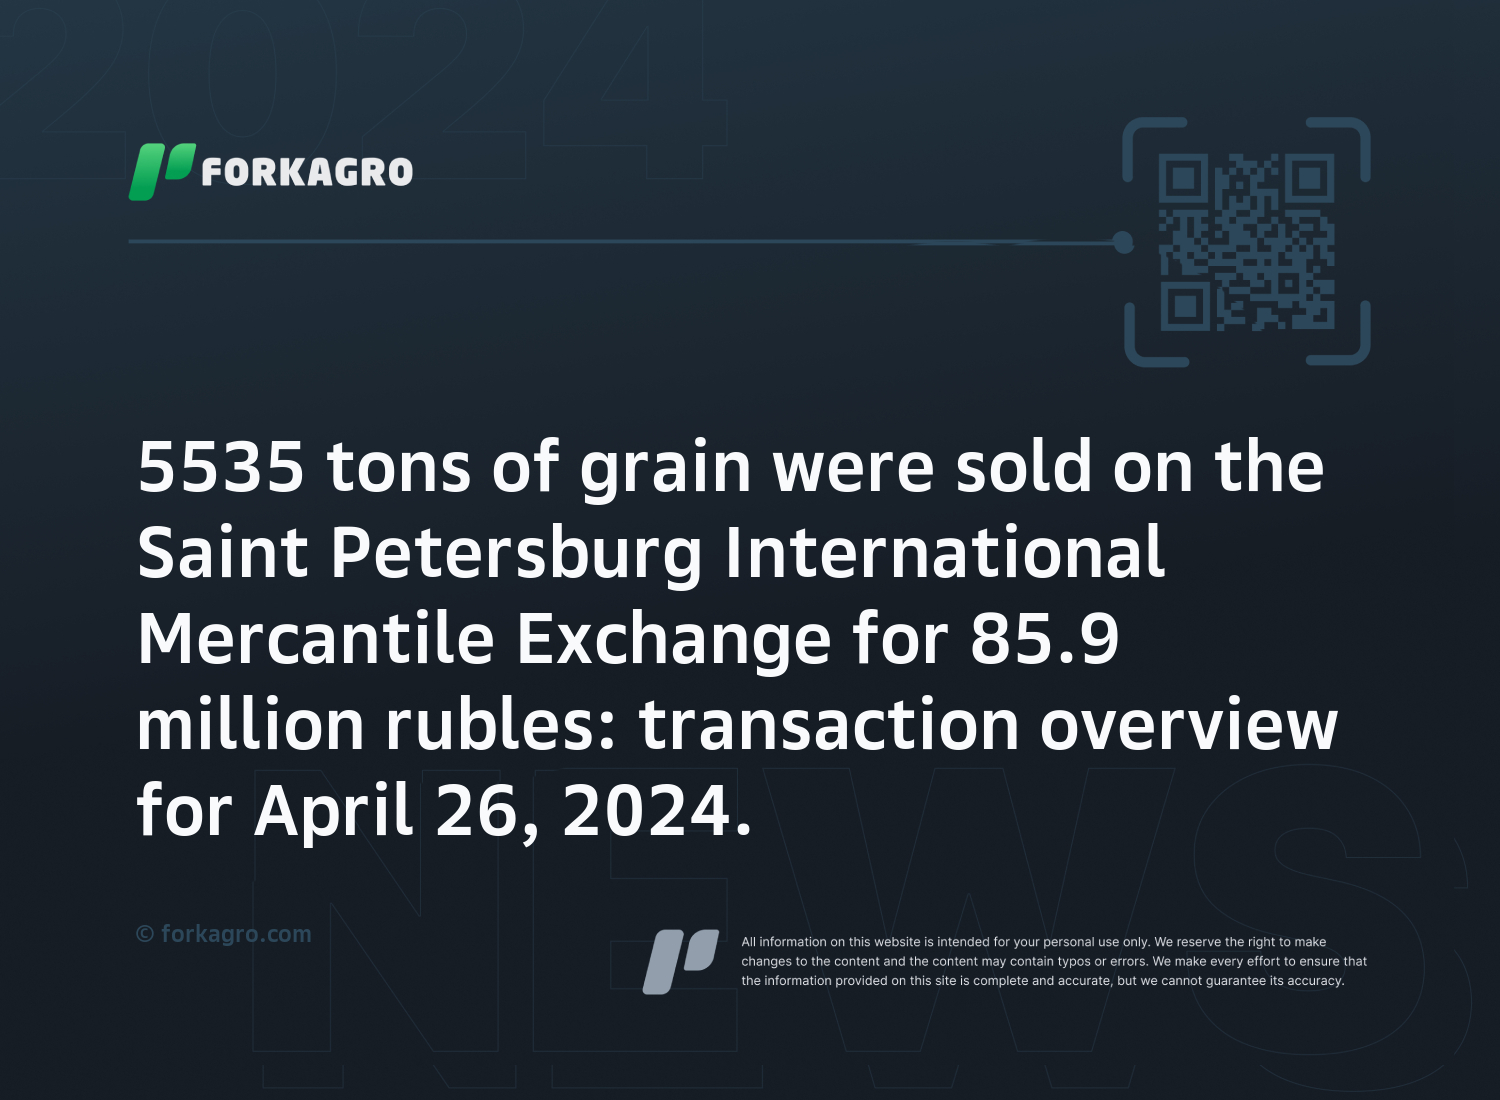 5535 tons of grain were sold on the Saint Petersburg International Mercantile Exchange for 85.9 million rubles: transaction overview for April 26, 2024.